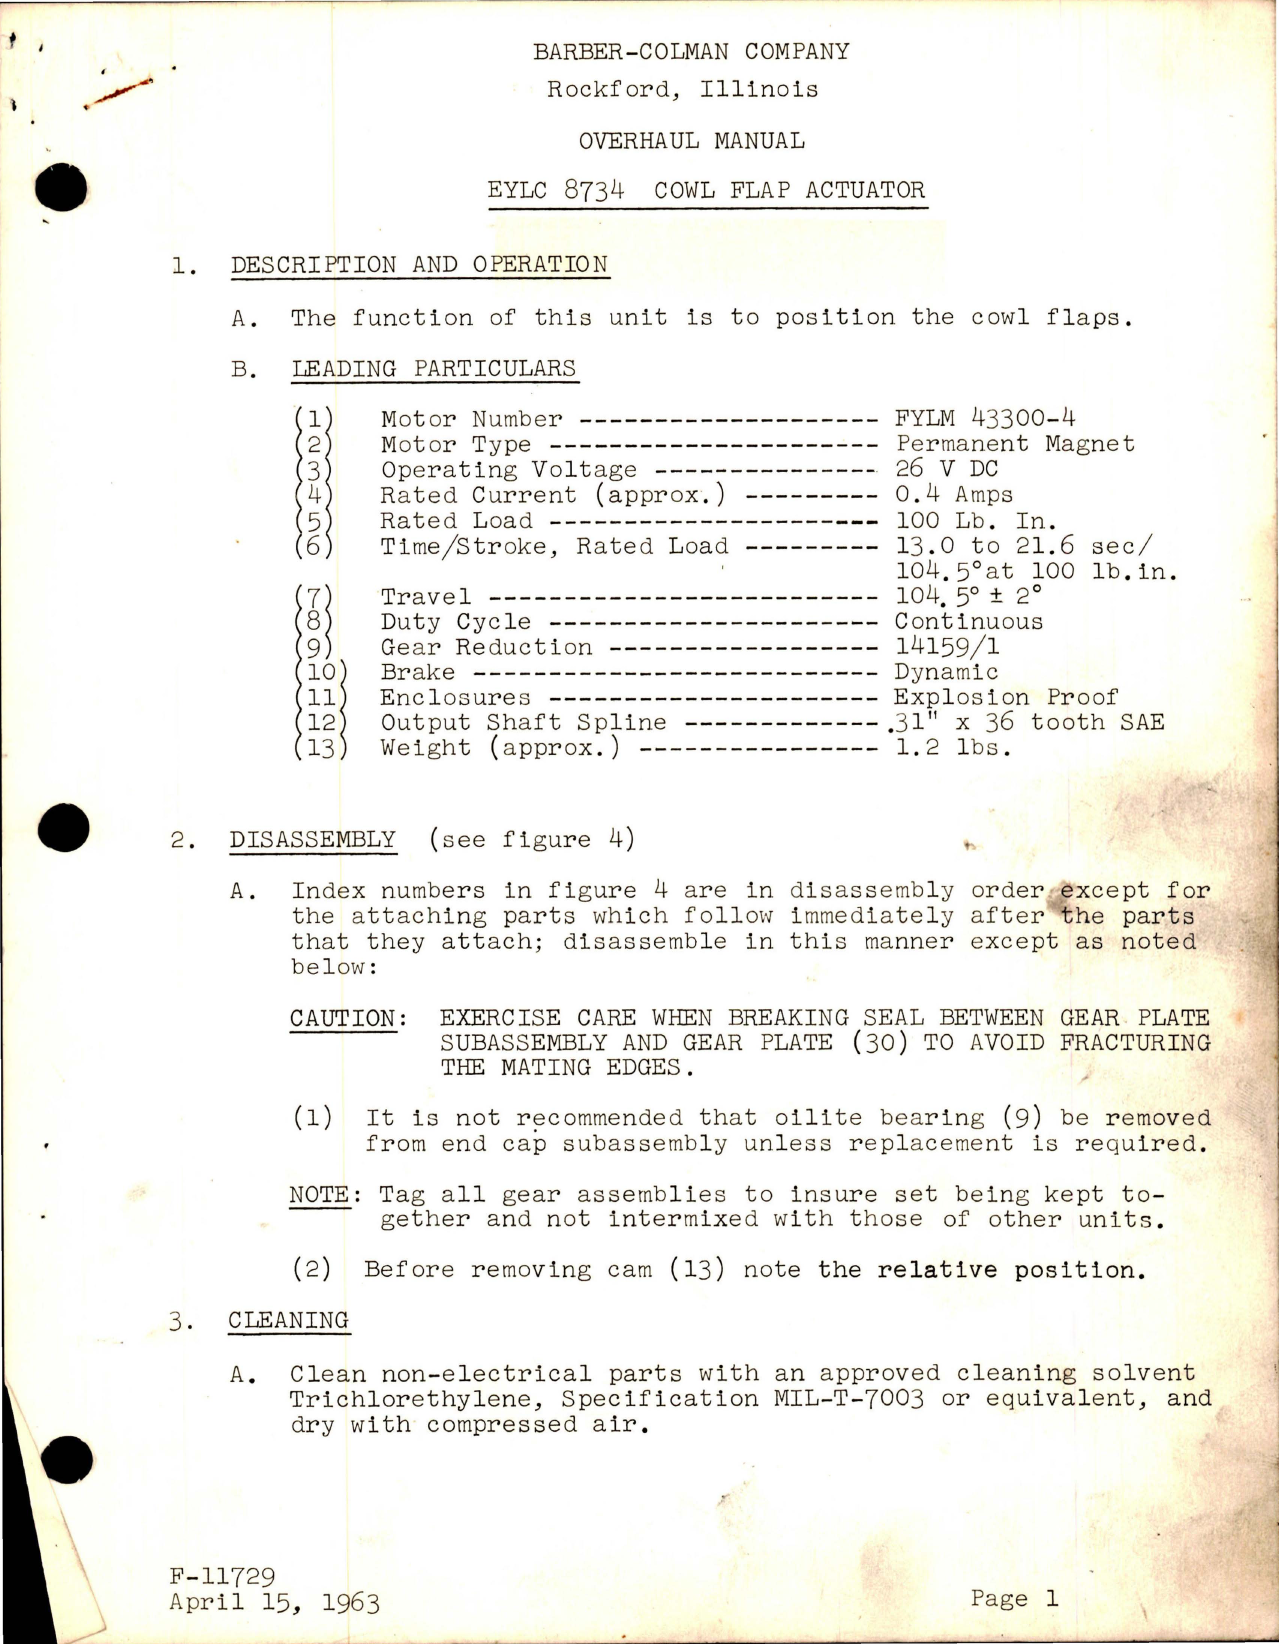 Sample page 1 from AirCorps Library document: Overhaul Instructions for Cowl Flap Actuator - EYLC 8734 